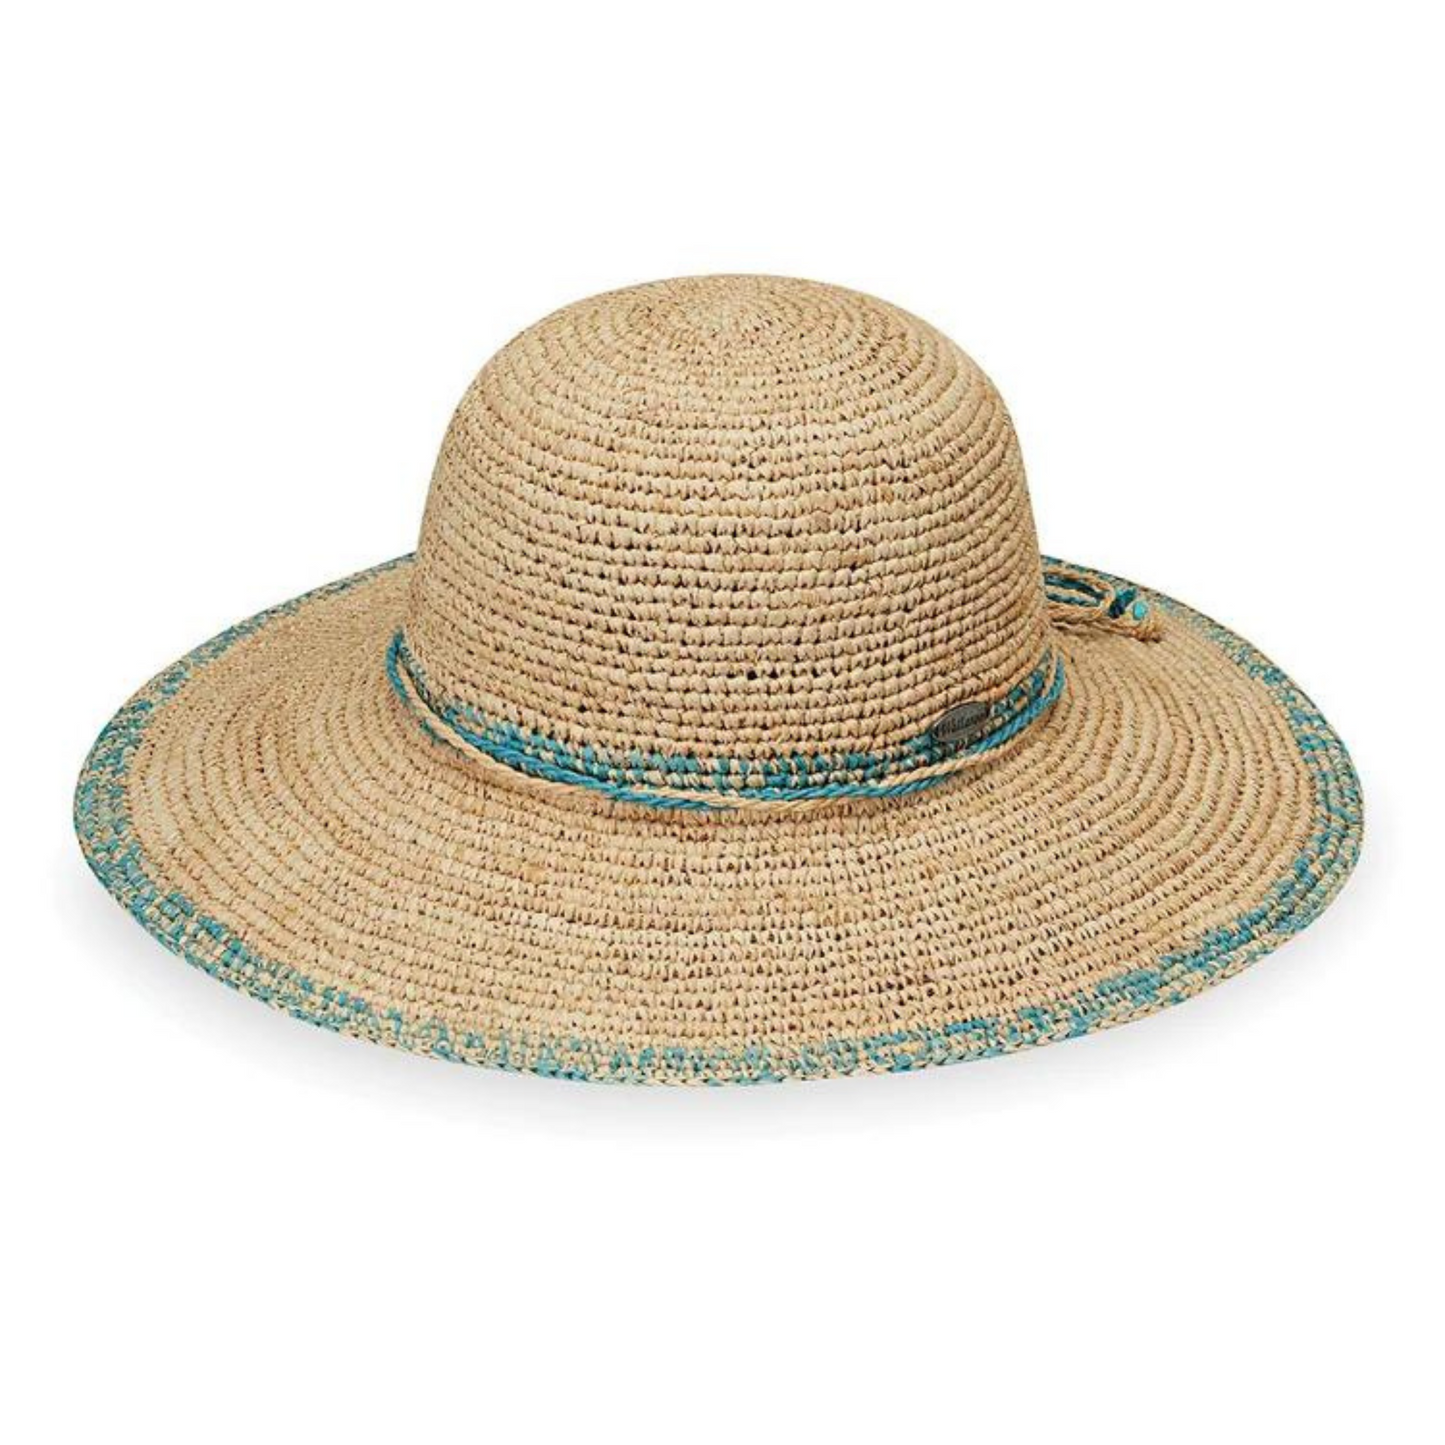 A natural weaved hat is pictured in profile with a subtle ombré of turquoise along rim and base of crown. A tan and turquoise string is wrapped.